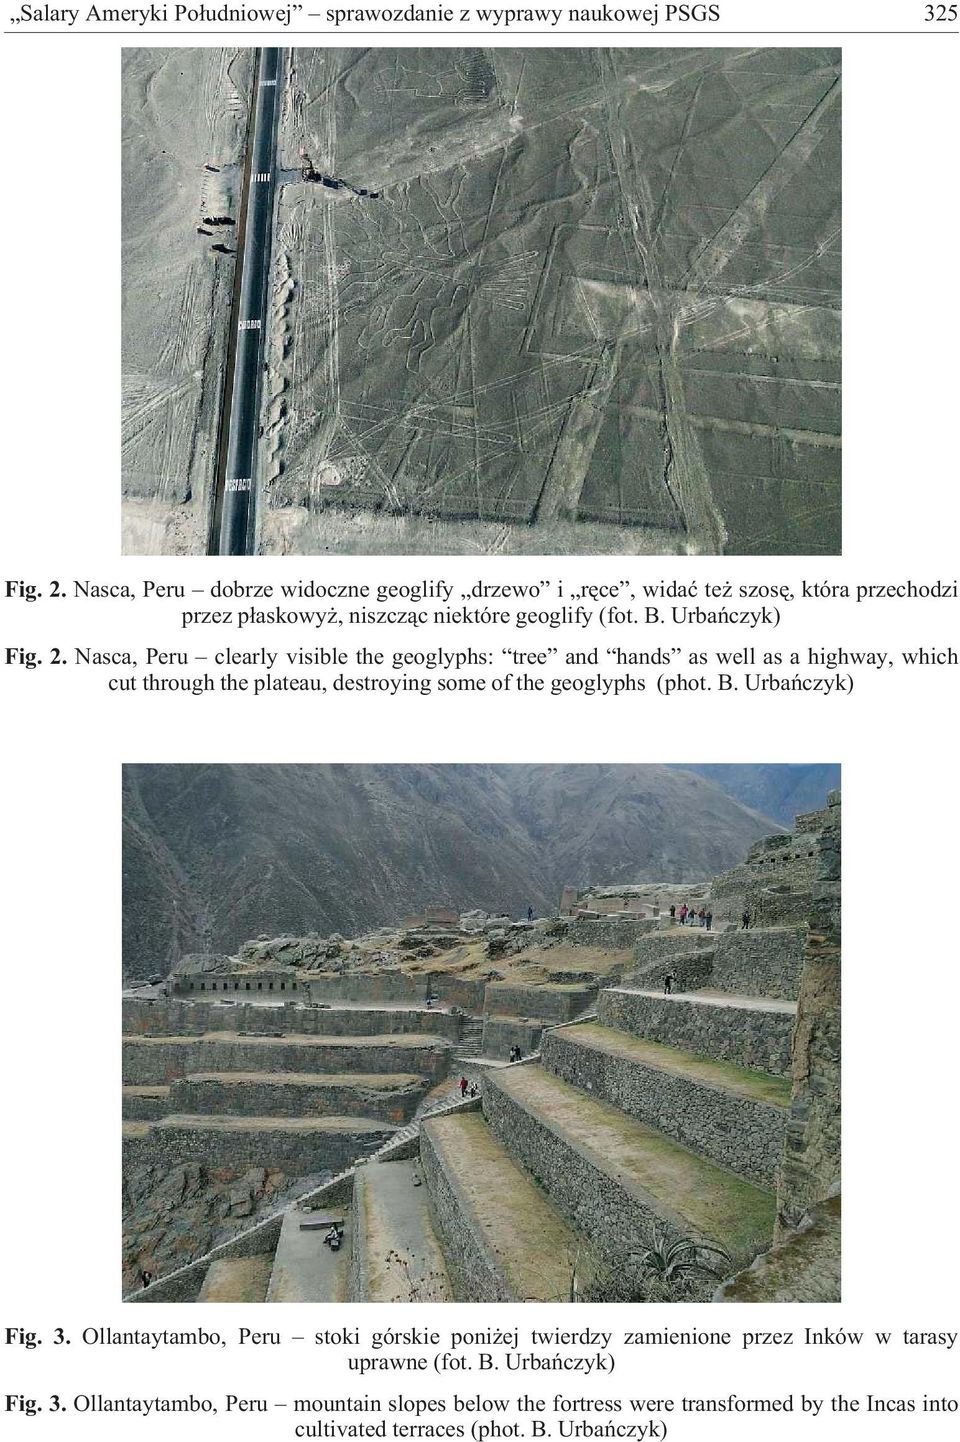 Nasca, Peru clearly visible the geoglyphs: tree and hands as well as a highway, which cut through the plateau, destroying some of the geoglyphs (phot. B.